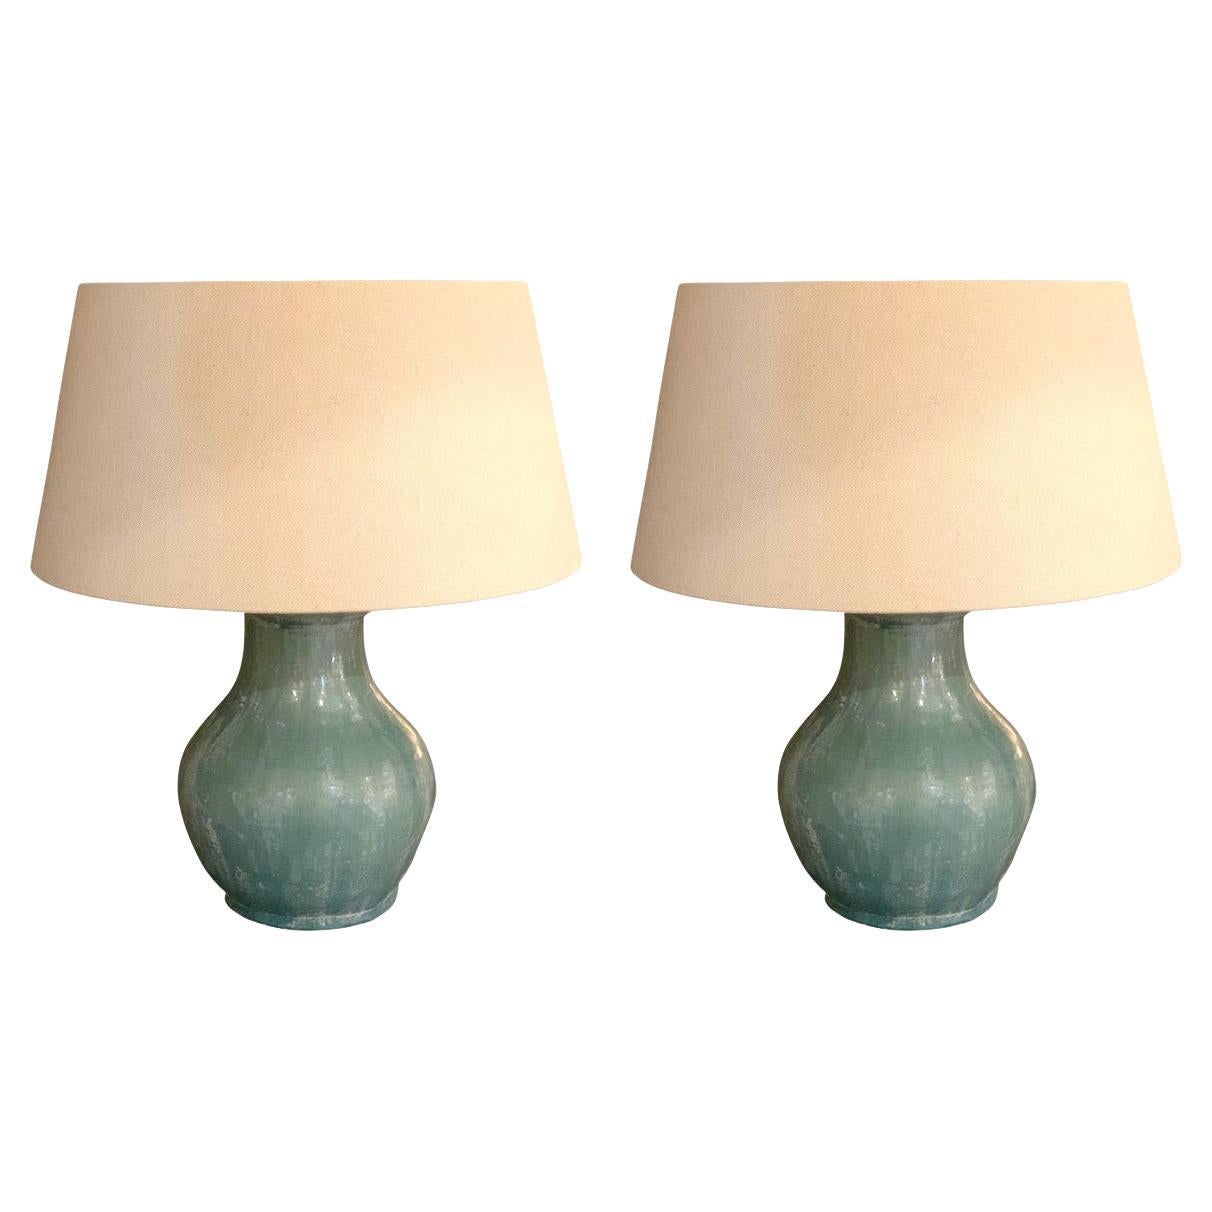 Pale Turquoise Weathered Glaze Pair of Lamps, China, Contemporary